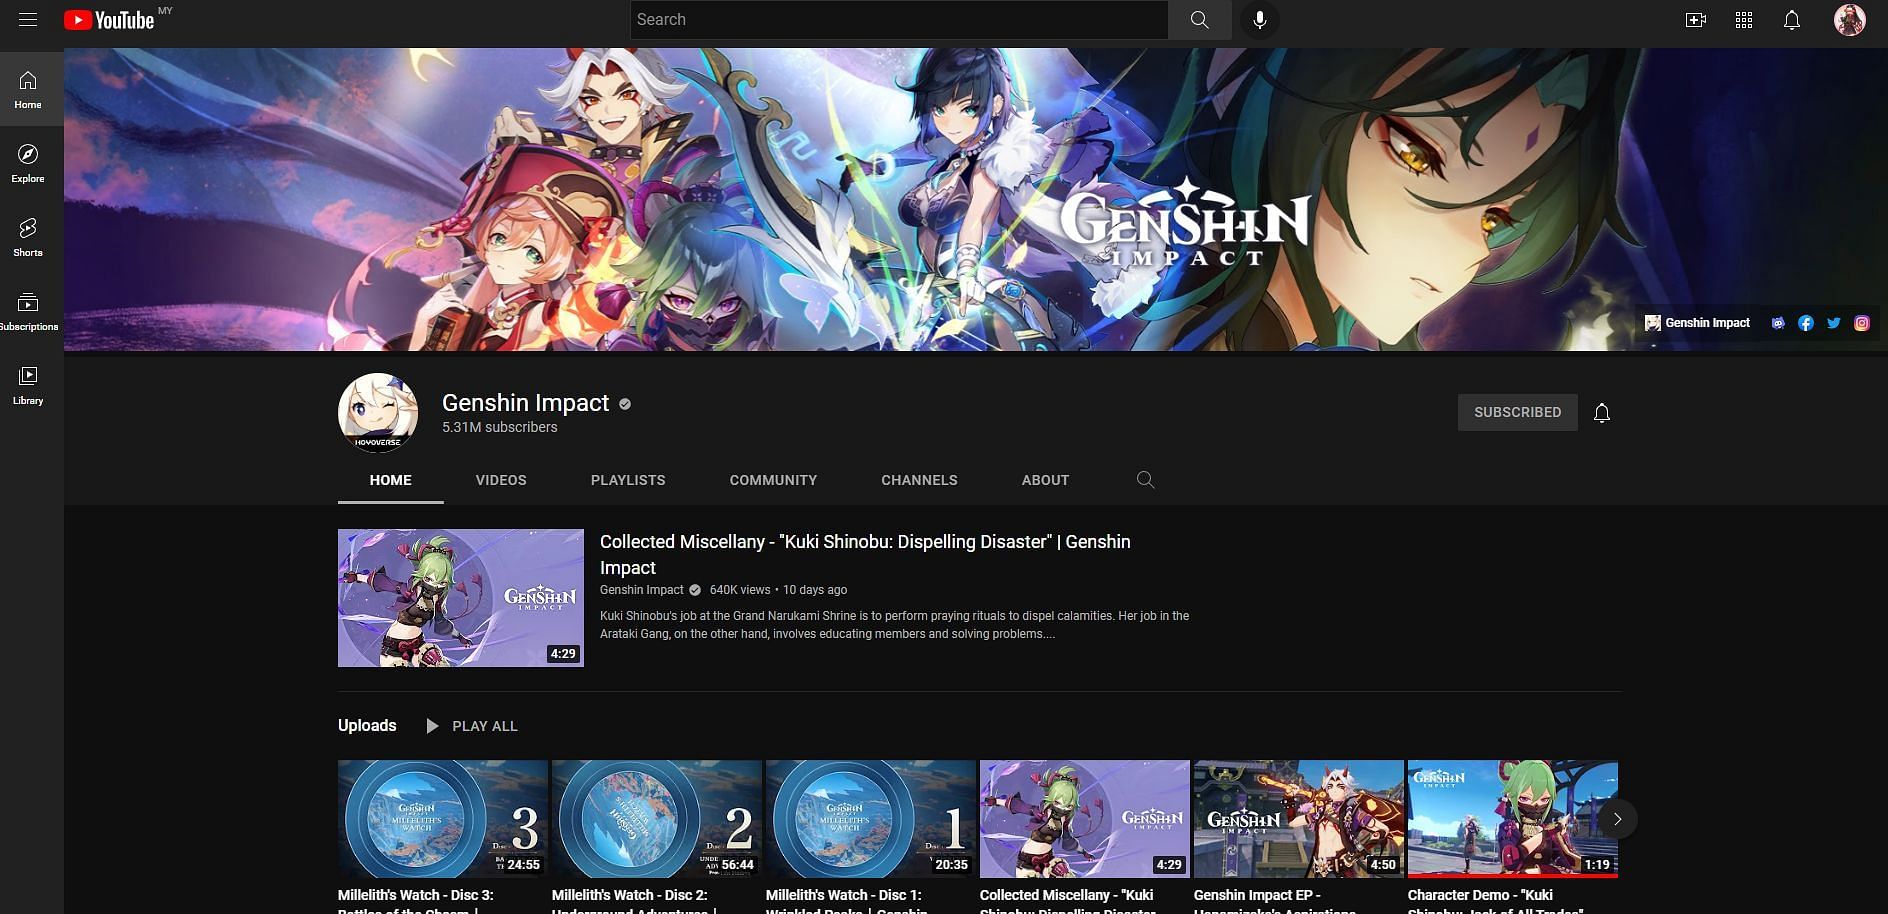 The official YouTube channel for the English version (Image via YouTube/Genshin Impact)